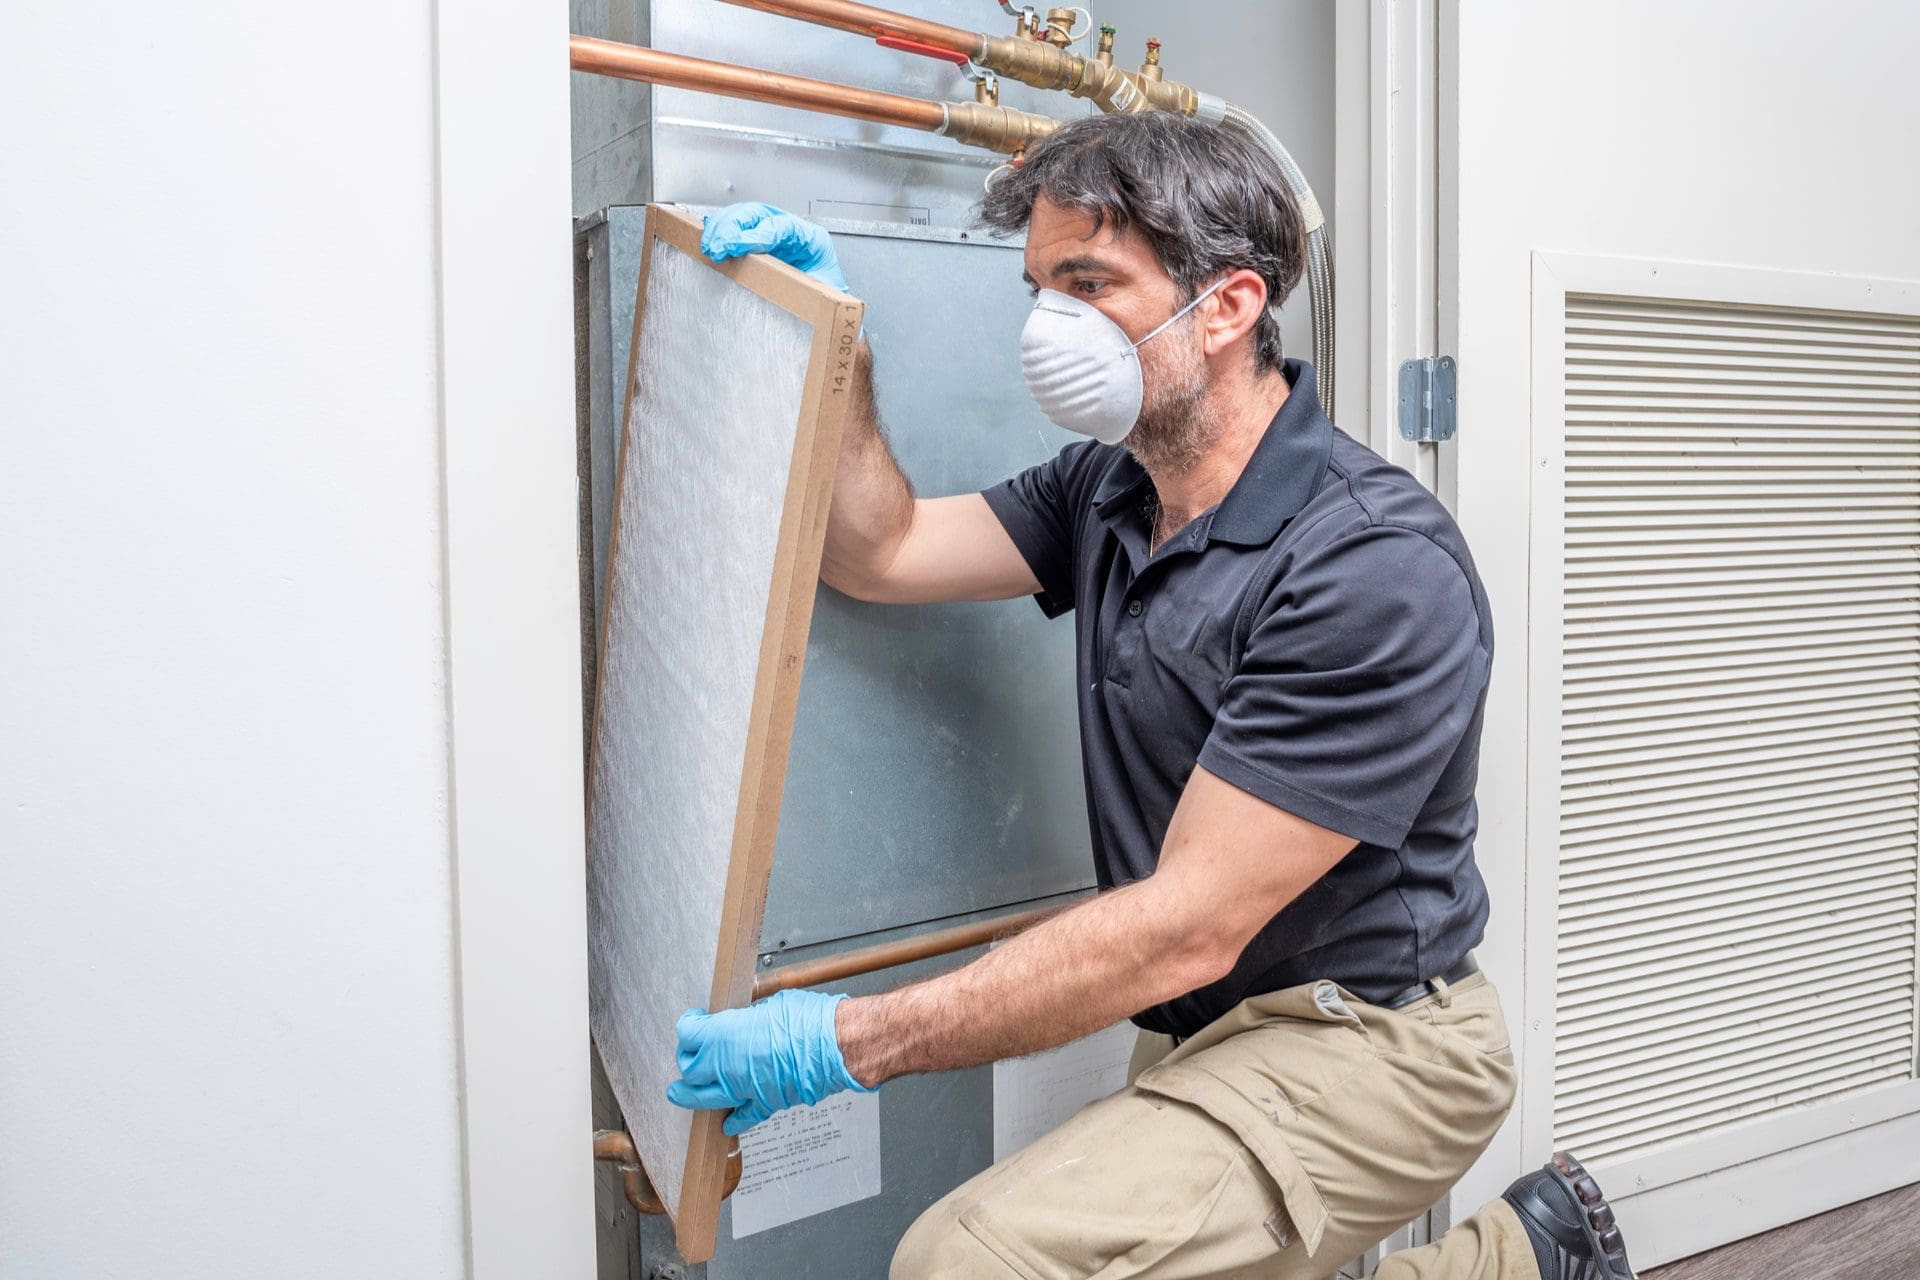 Step 1 Change Your Air Filters | EASY 5 STEPS TO PREVENT MOLD GROWTH IN YOUR HVAC SYSTEM